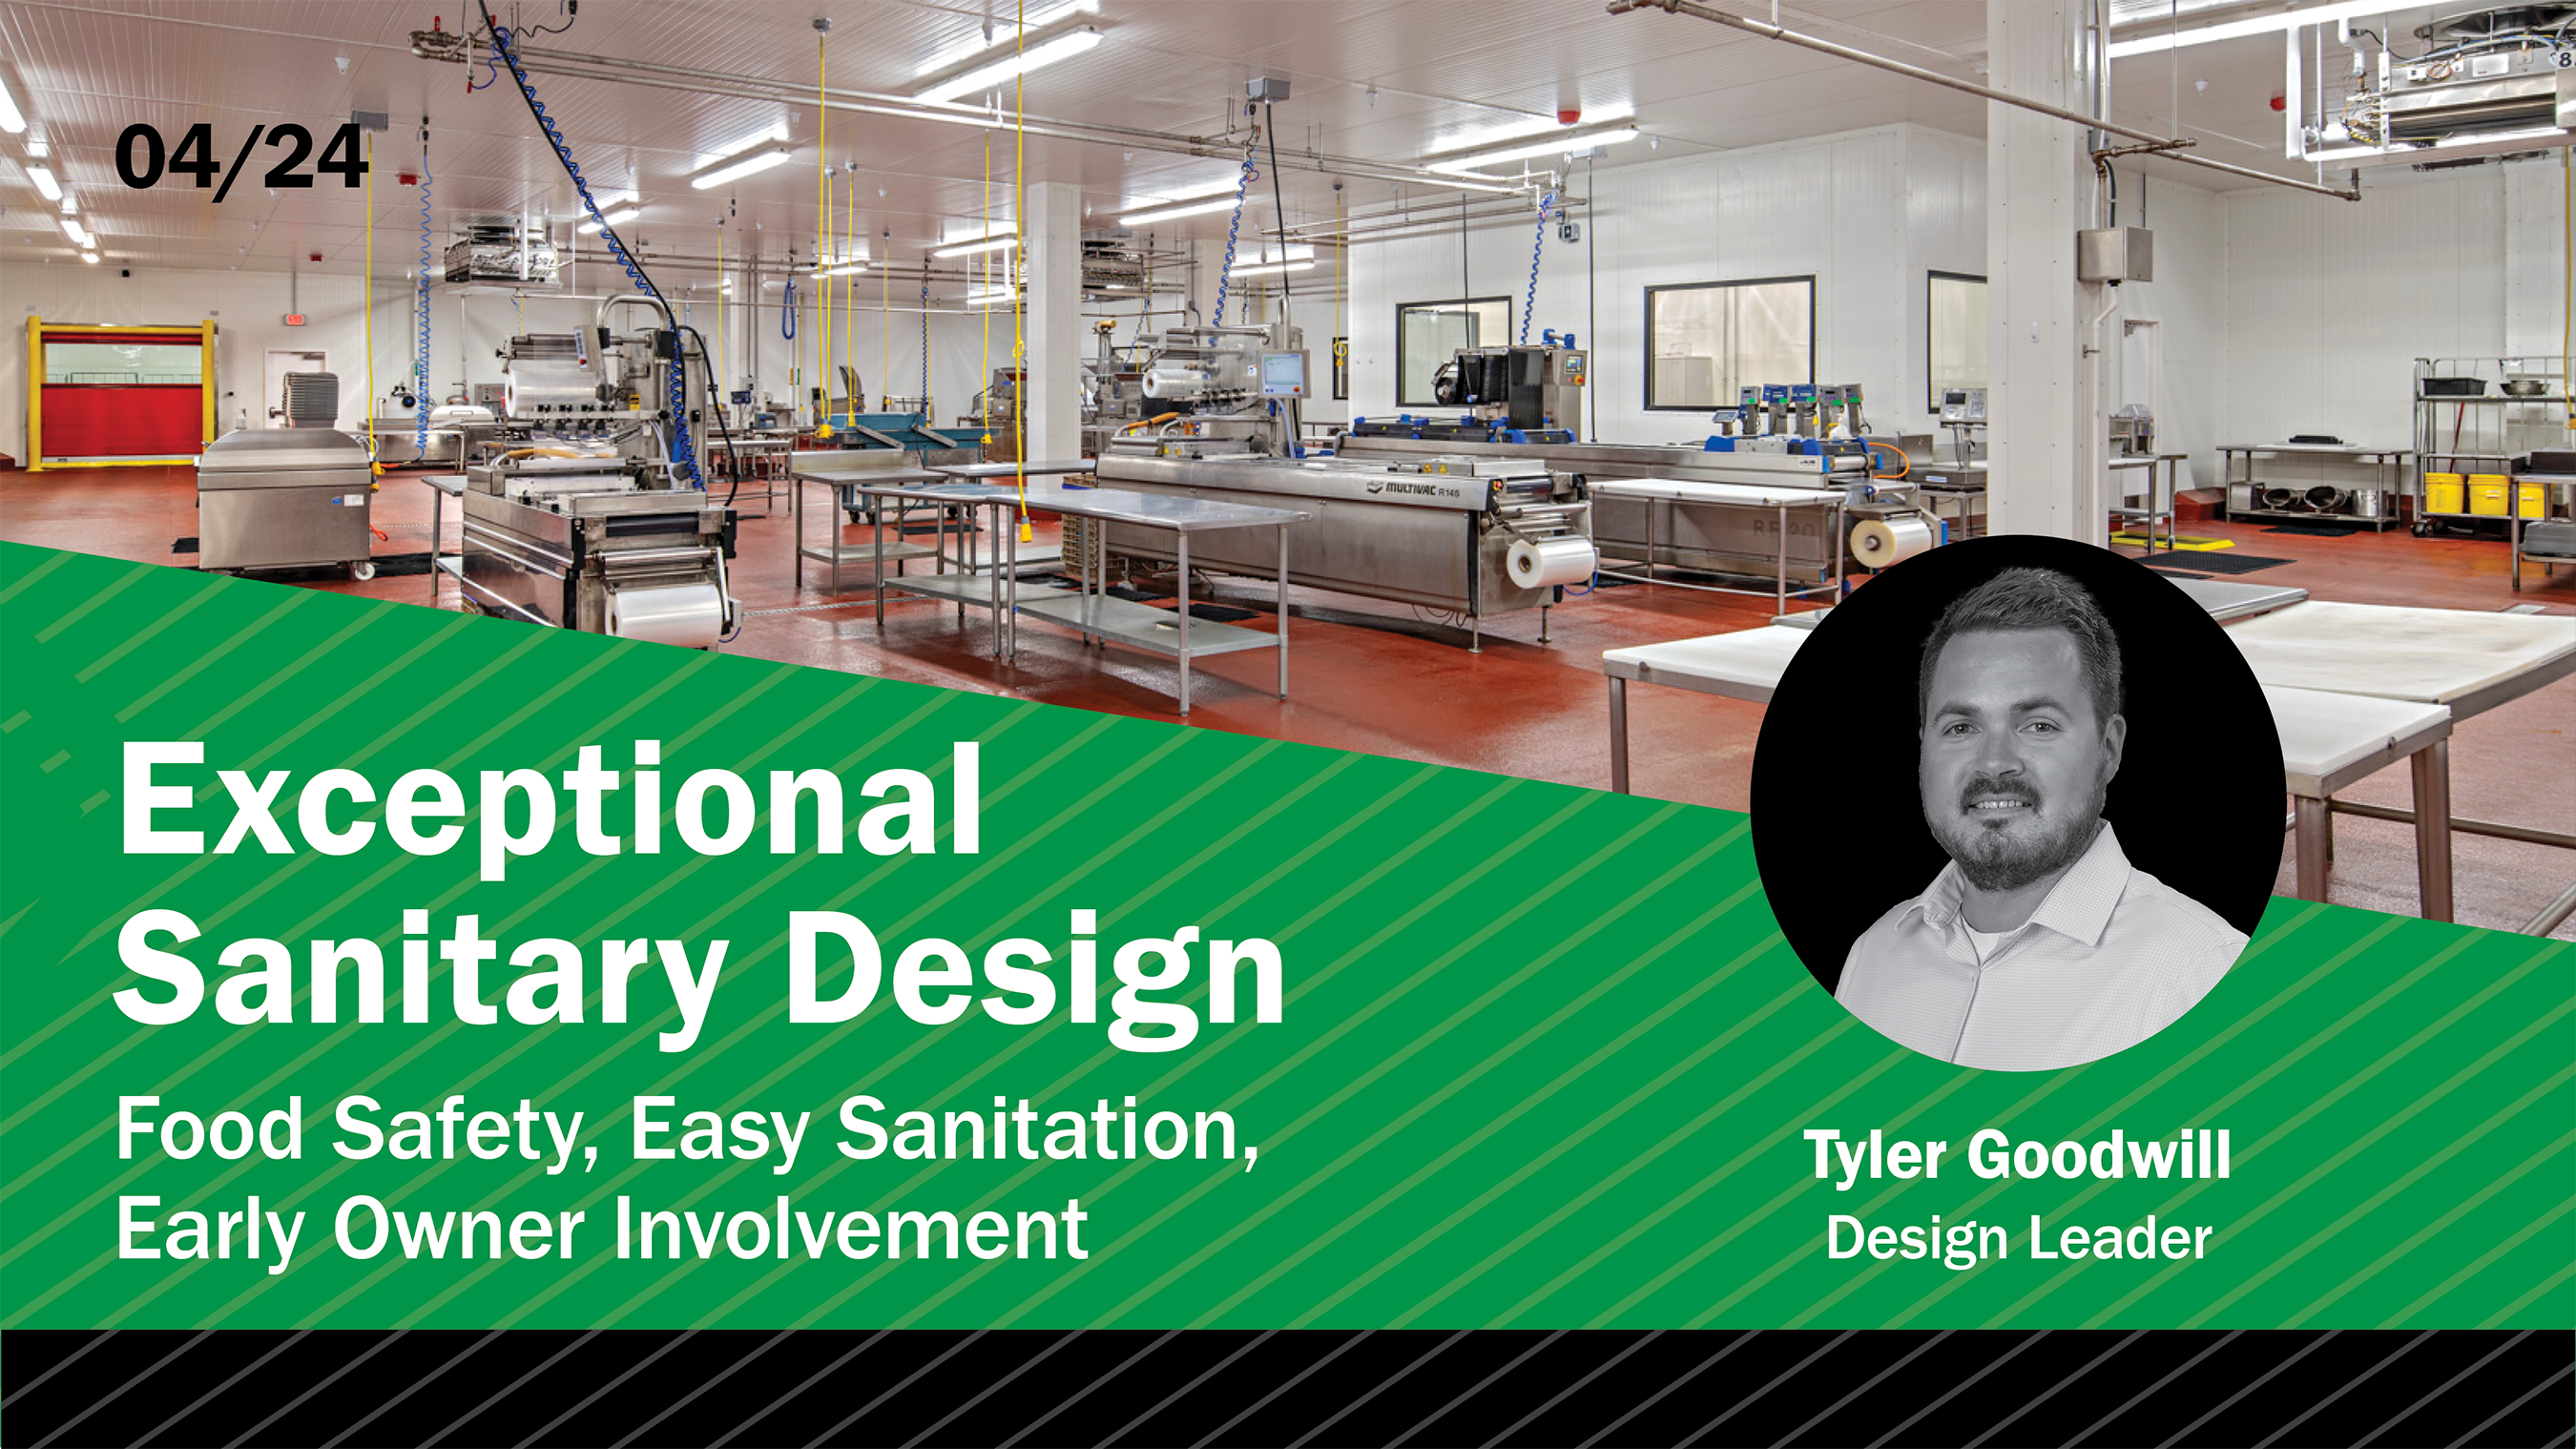 The Secret to Exceptional Sanitary Design by Tyler Goodwill.